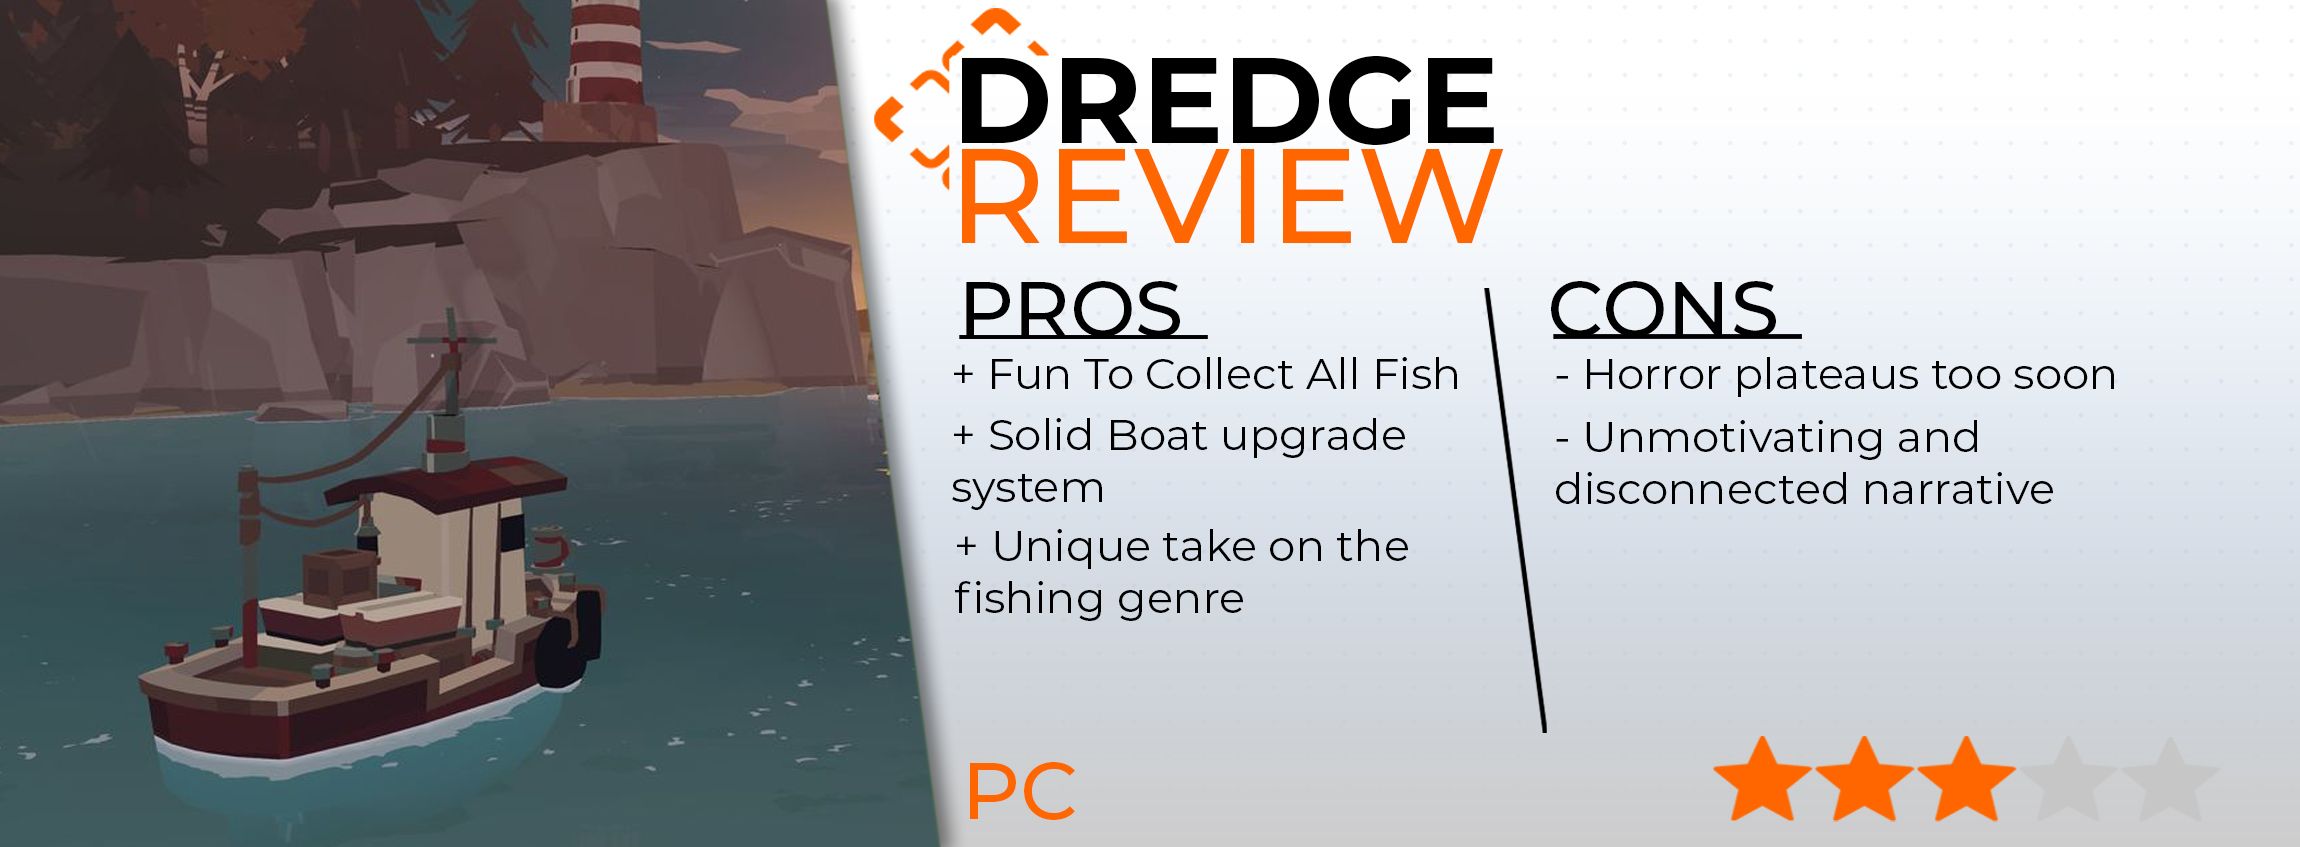 Dredge review – horrors lurk in the deep in this eldritch fishing game, Games